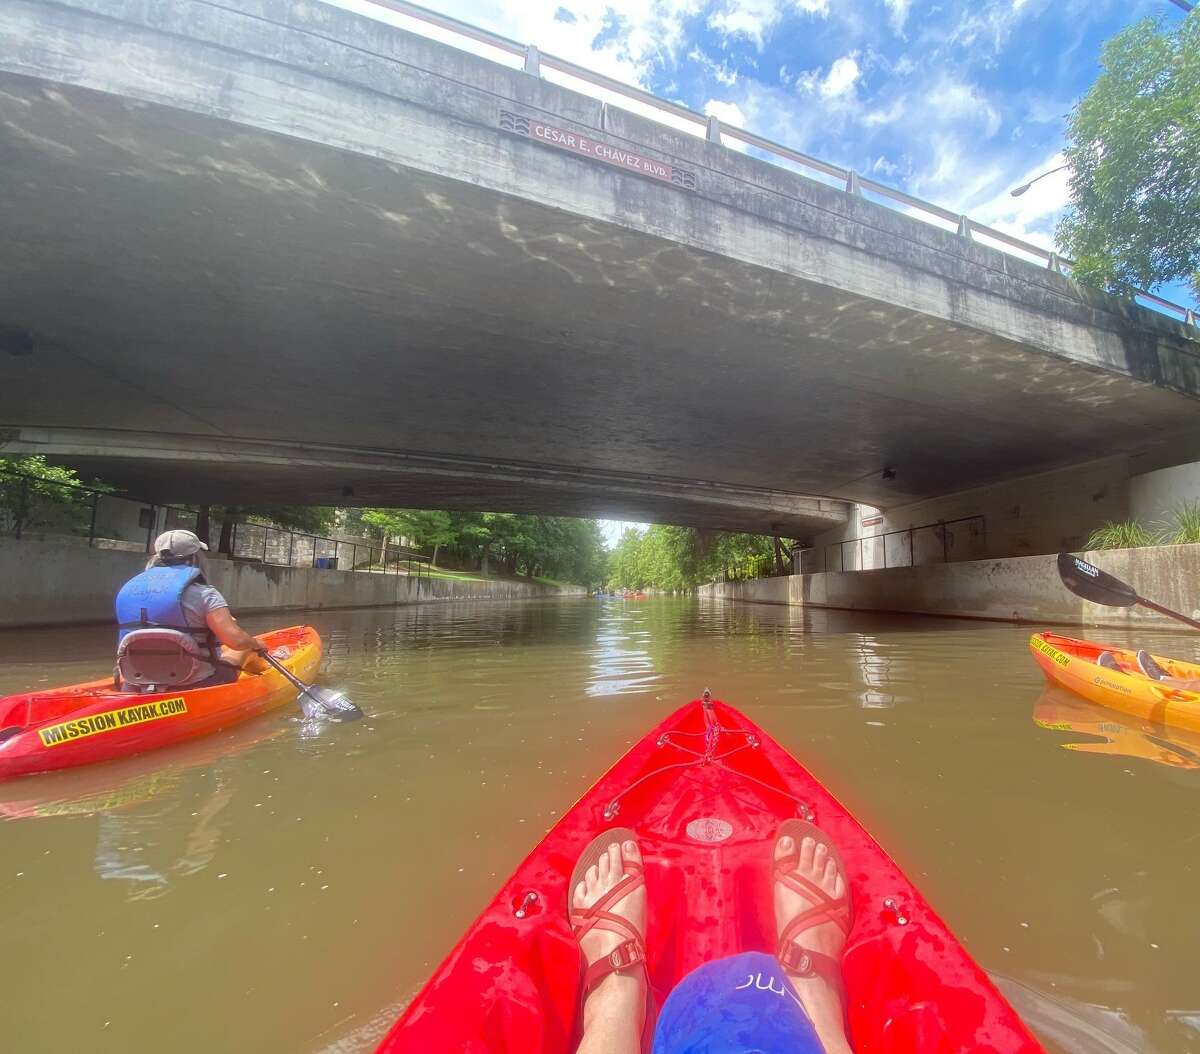 District 1 City Councilman Roberto C. Trevino says his office, which oversees the downtown area, received "numerous" requests to add more days to kayak the River Walk.